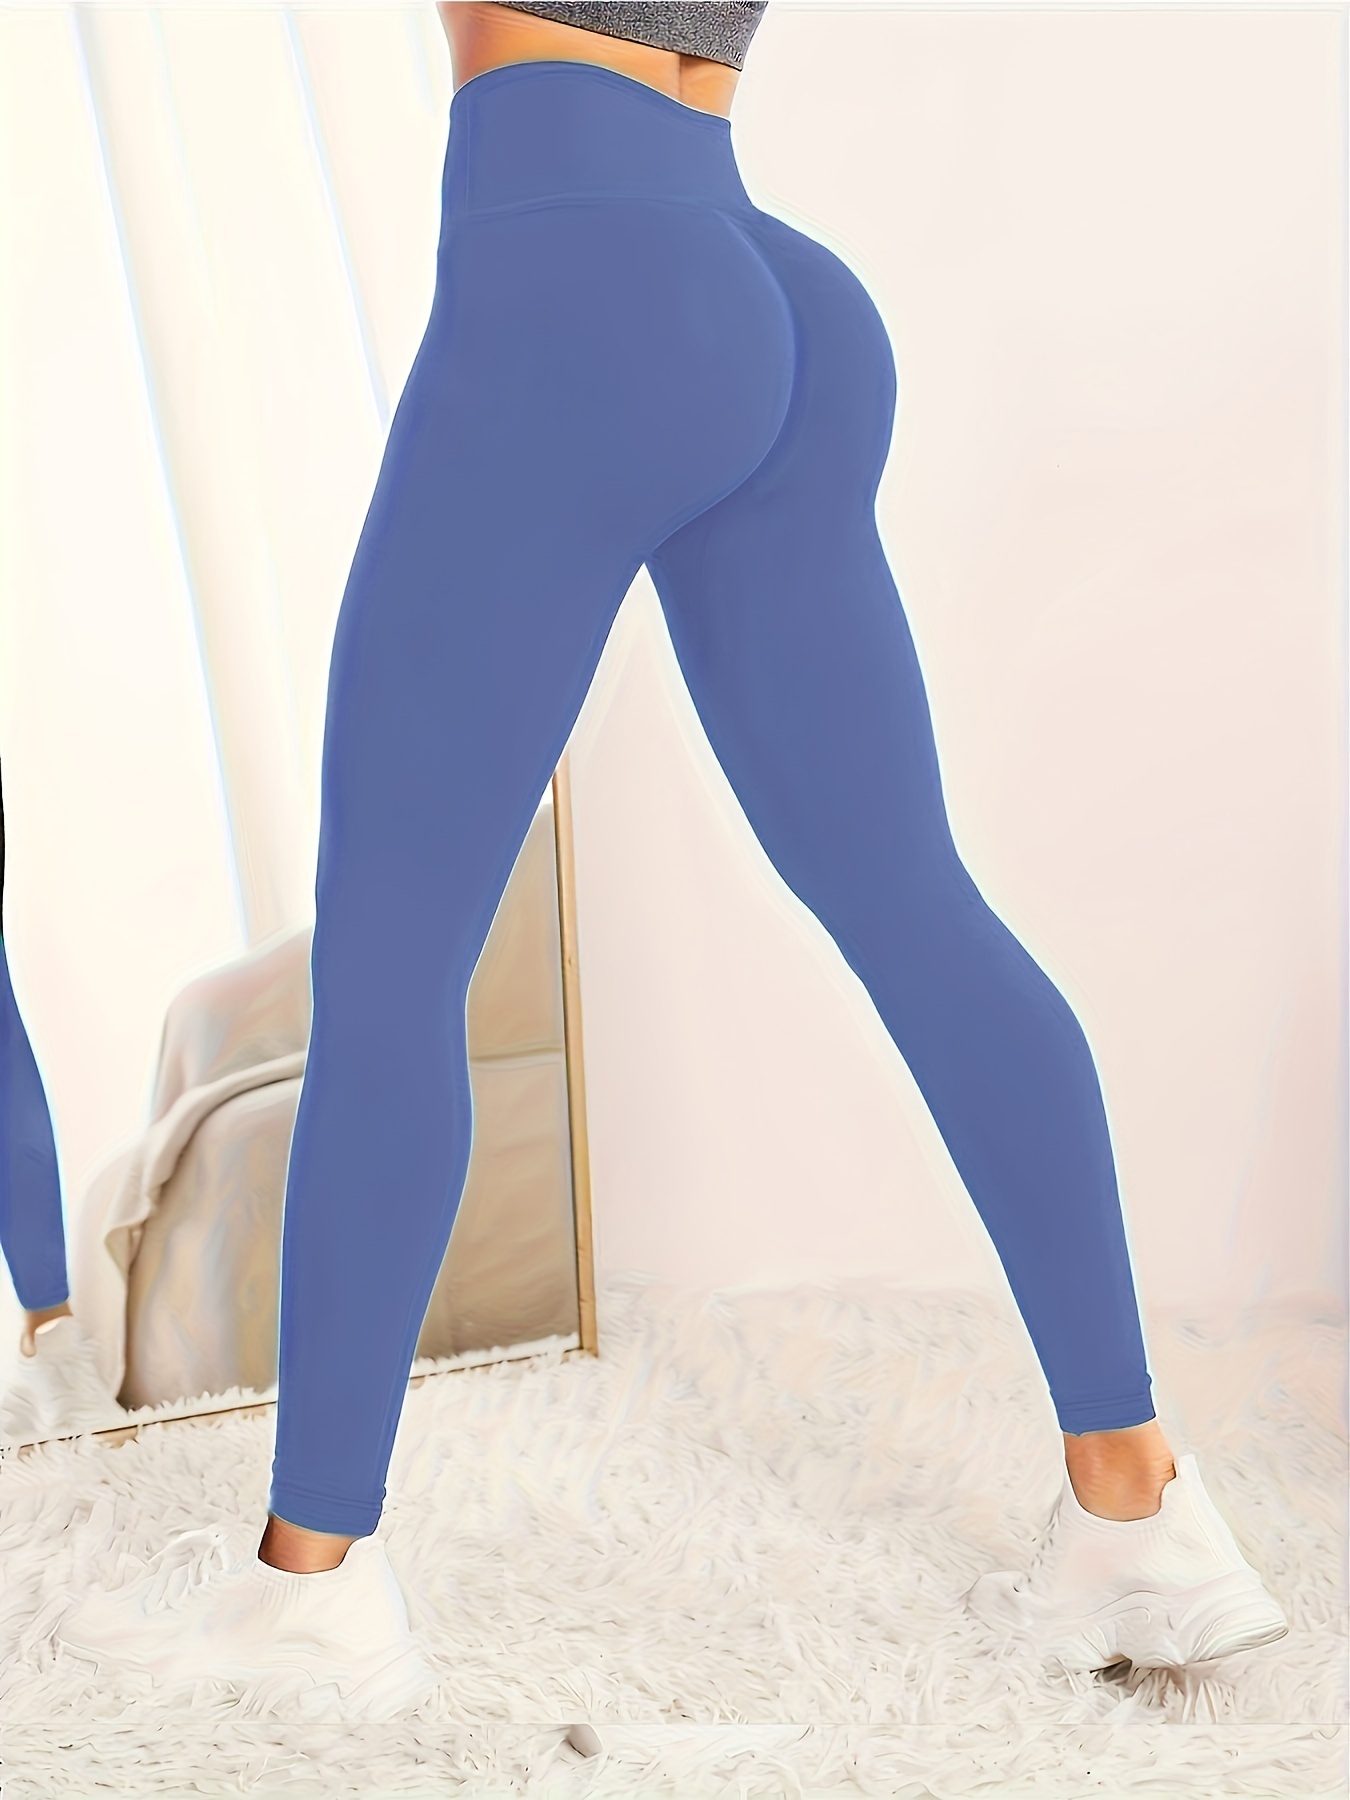 TAIAOJING Women High Waist Workout Gym Leggings Ultra Fine Brushed Yoga  With Pockets And Thin Fitness Sports Yoga Pants for Workout Running 